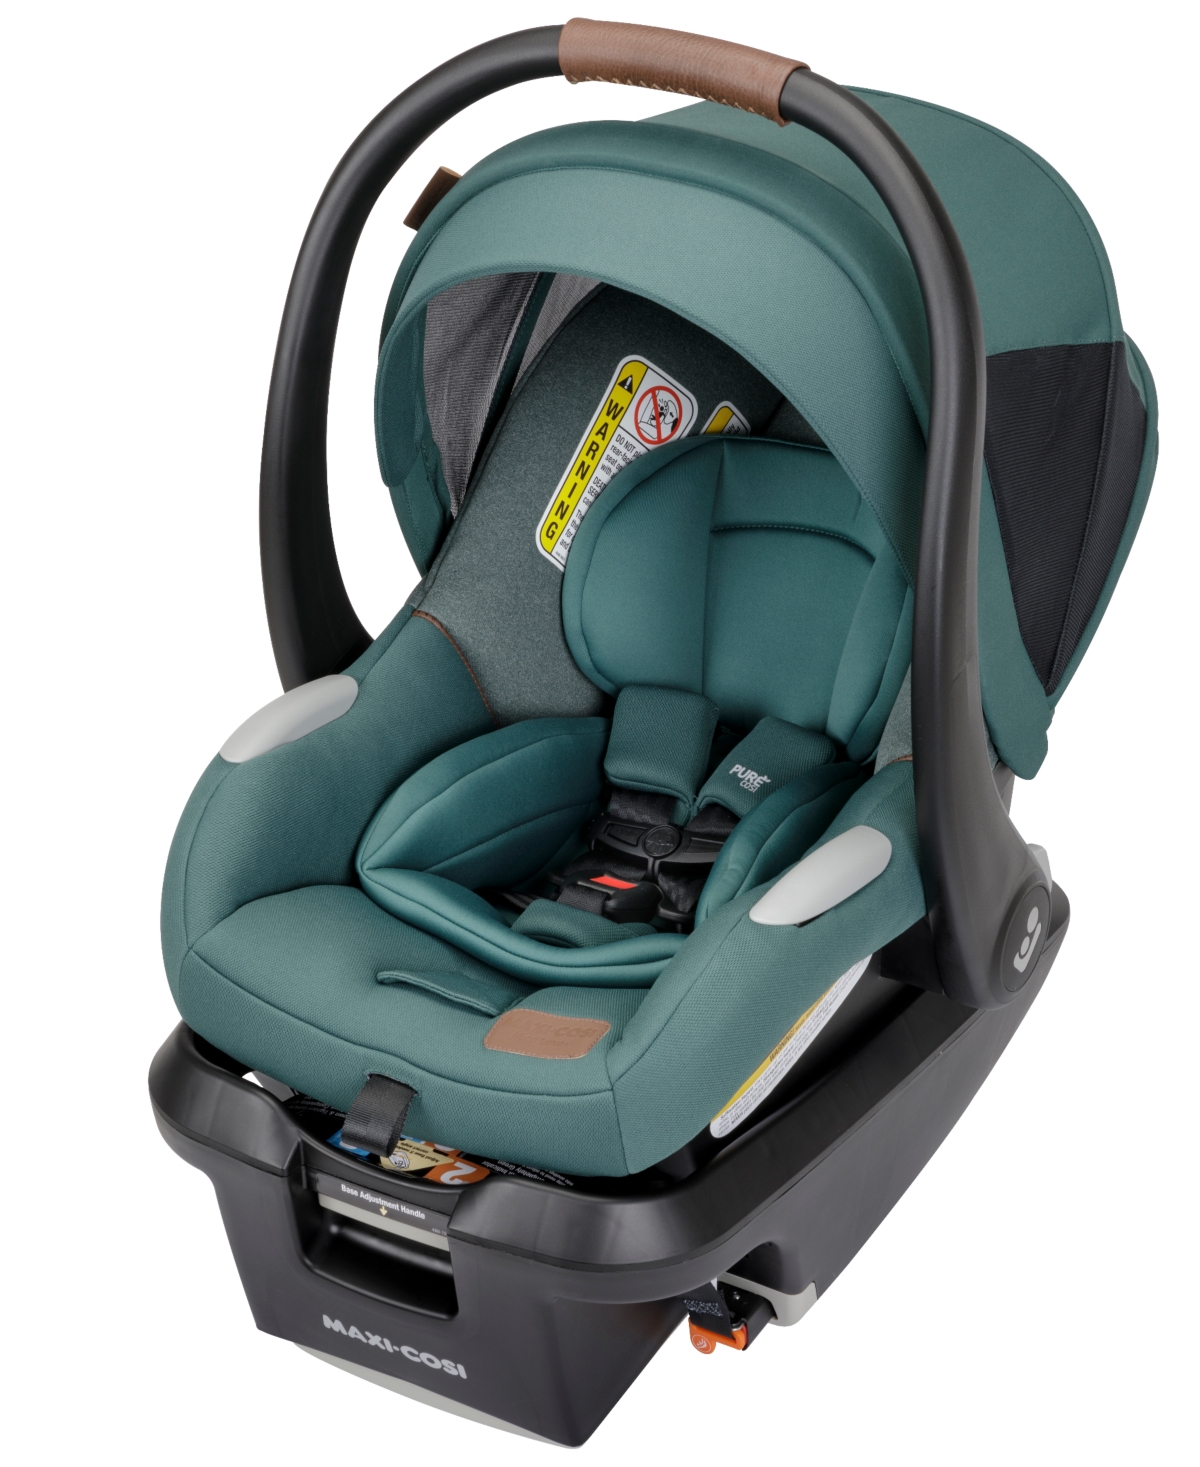 Maxi-cosi Mico Luxe+ Infant Car Seat In Essential Green